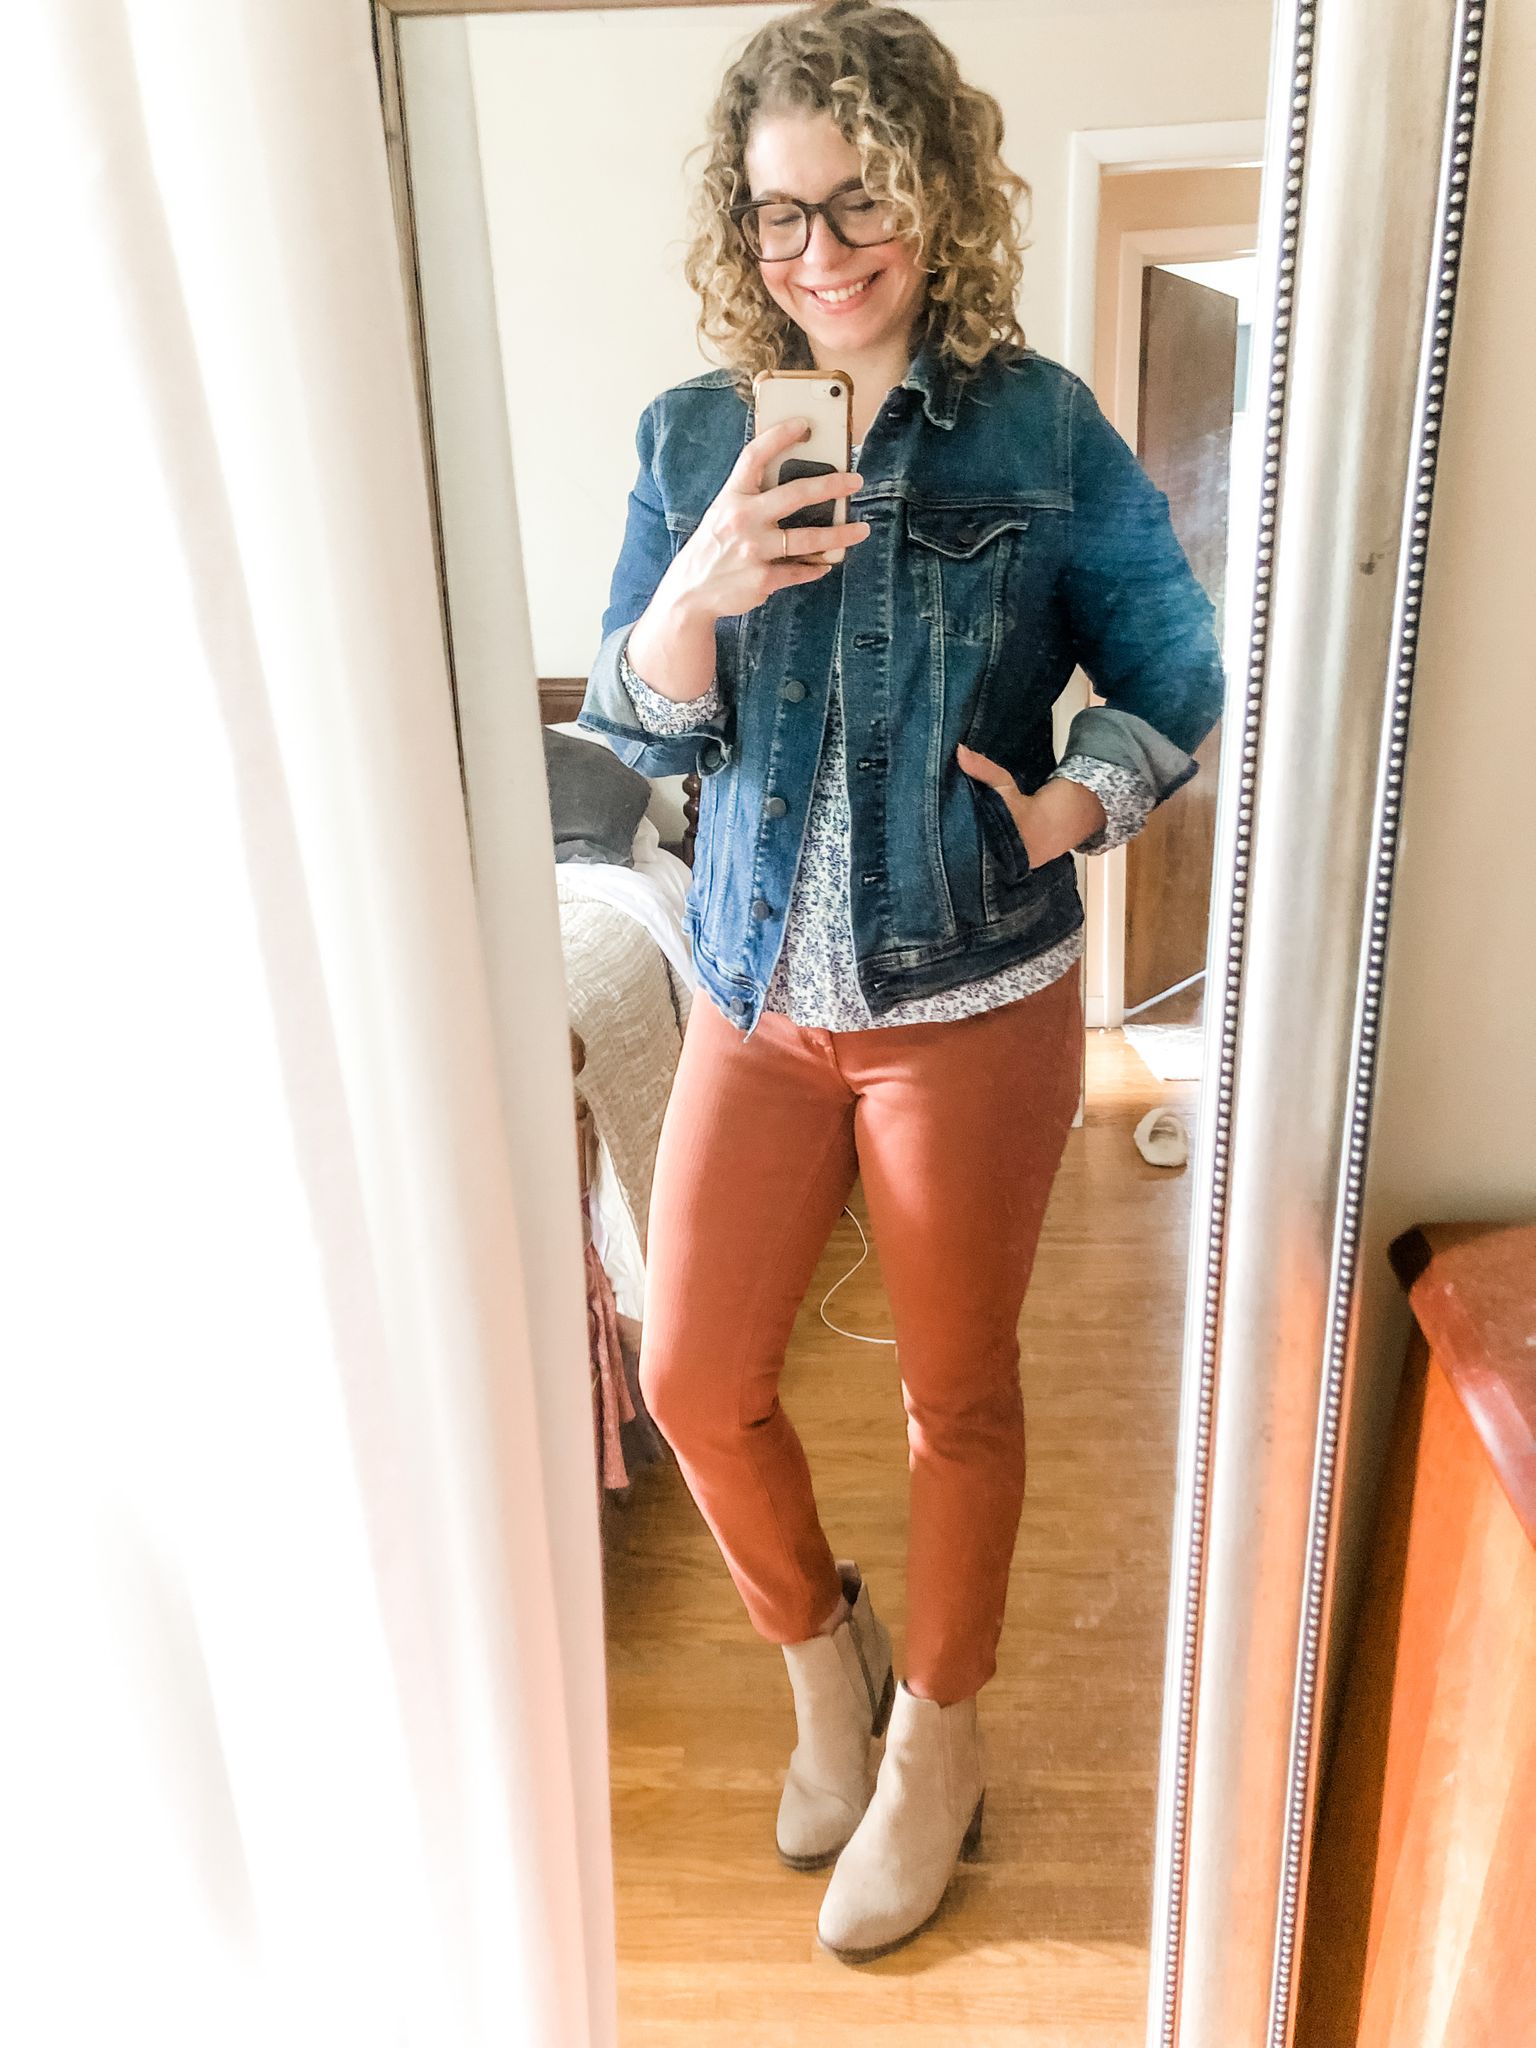 Smiling woman with blonde curly hair and glasses taking a full body selfie of her outfit - denim jacket, floral long sleeve shirt, orange pants and khaki boots